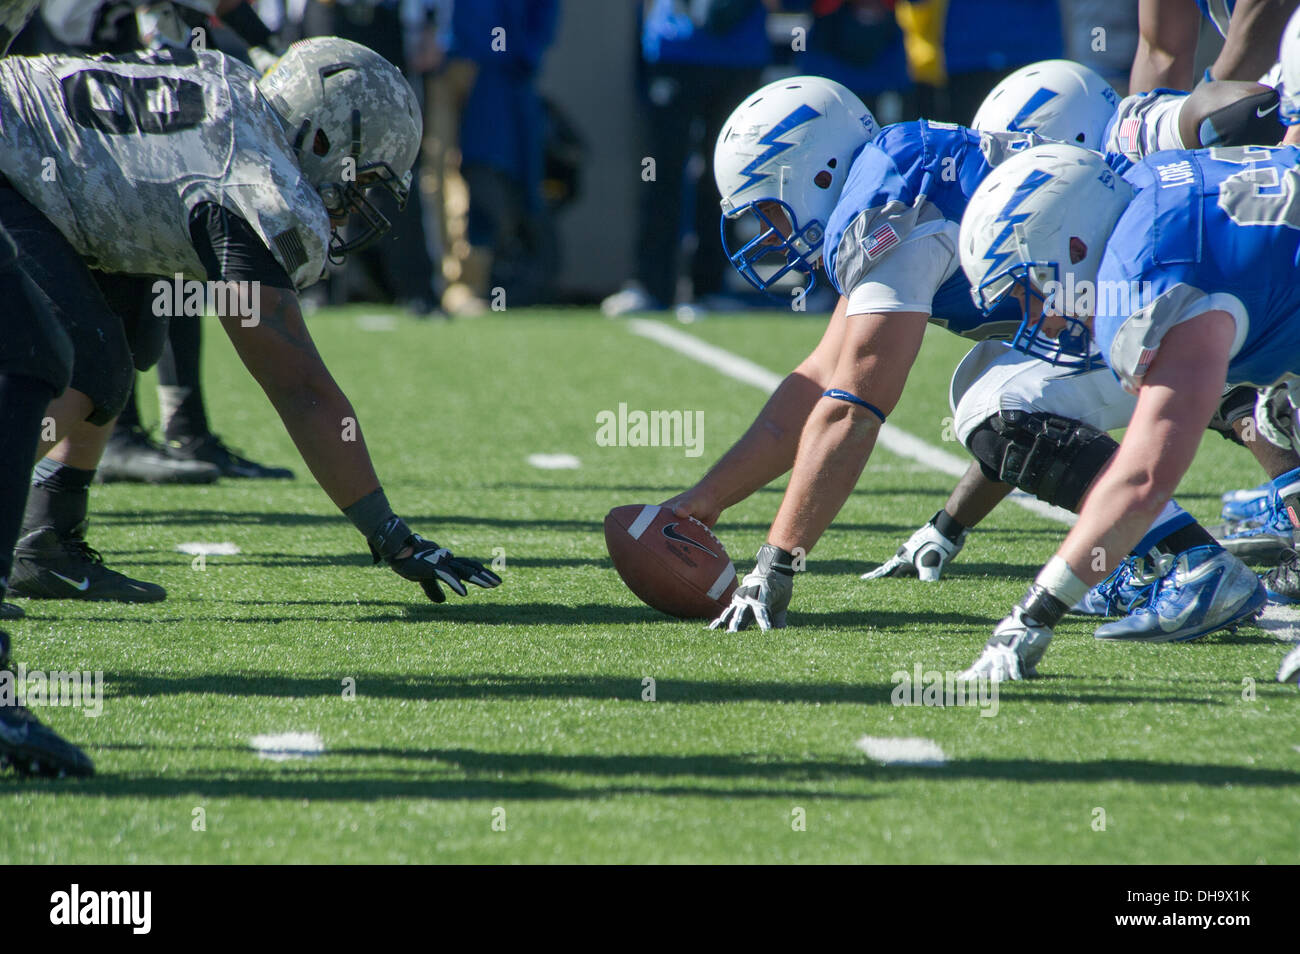 Army and Air Force football players face off at the line of scrimmage at Falcon Stadium during an Air Force verses Army football game in Colorado Springs, Colorado, Nov. 02, 2013. Stock Photo